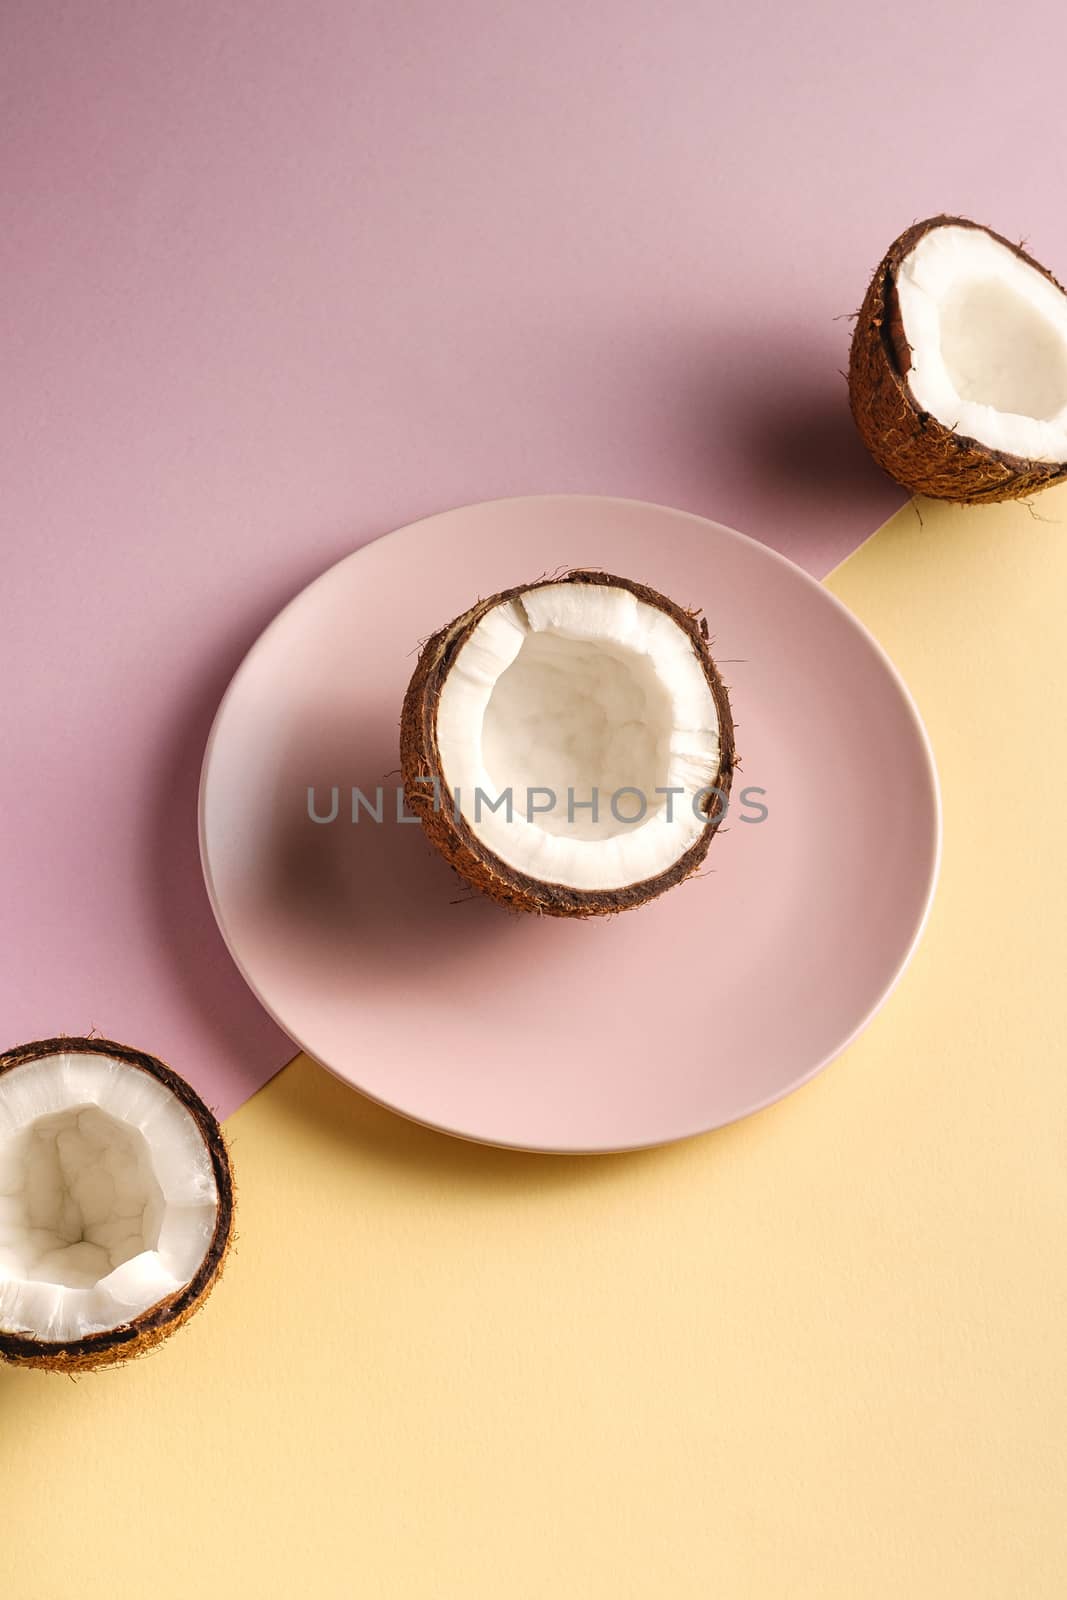 Coconut half in plate with nut fruits on cream yellow and pink plain background, abstract food tropical concept, angle view